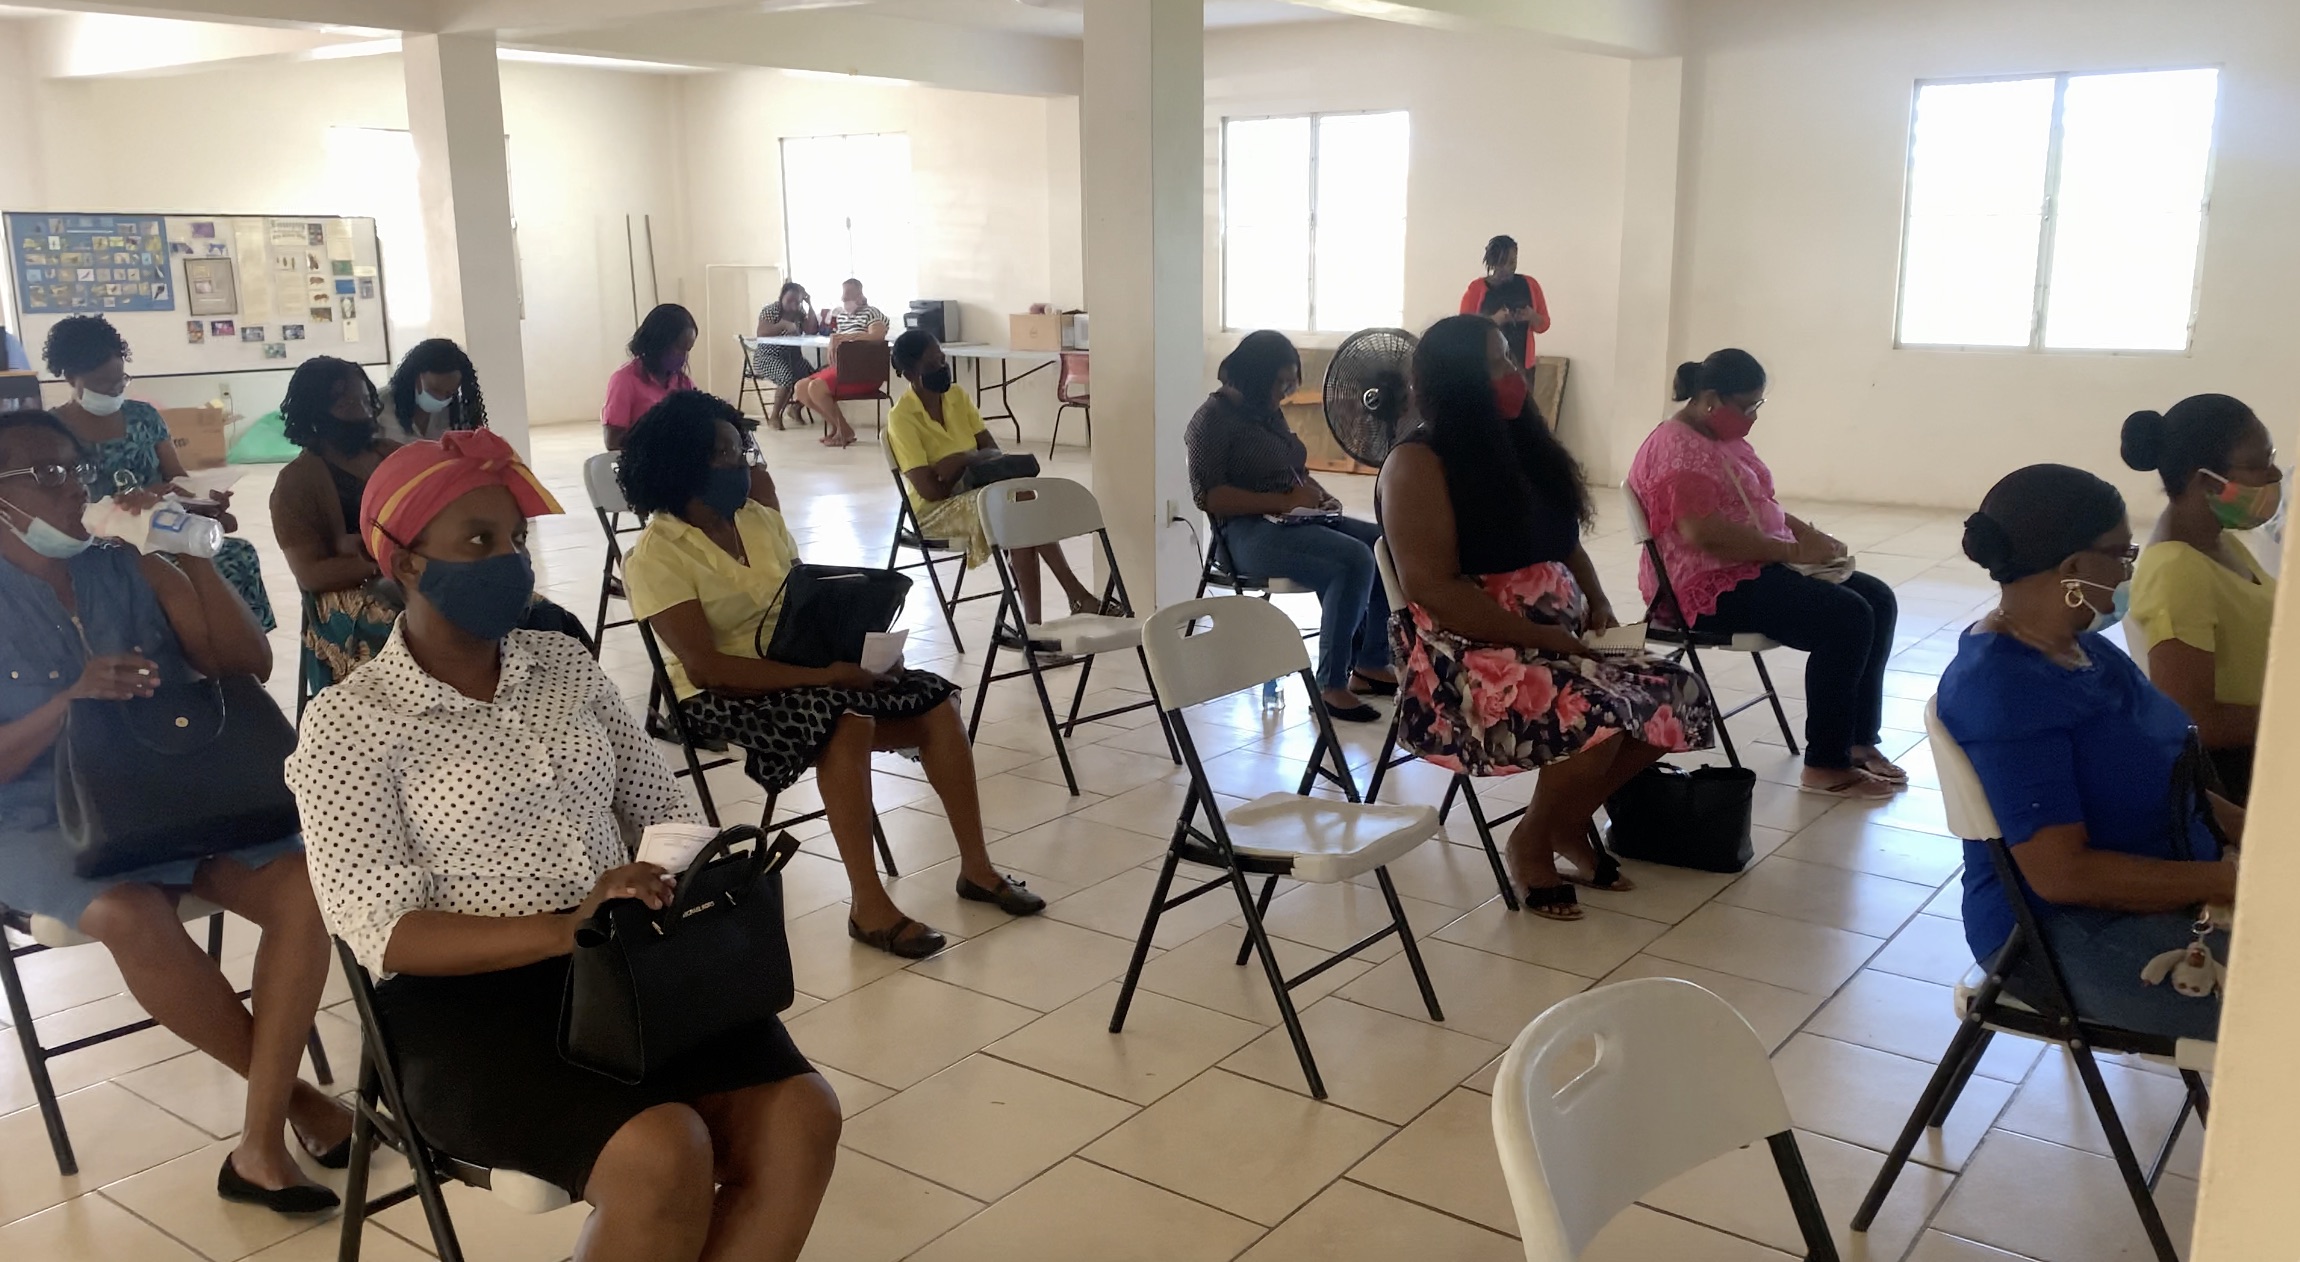 Early Childhood Development supervisors attend a COVID-19 Compliance sensitization training, facilitated by the Department of Education in the Nevis Island Administration, on July 16, 2020